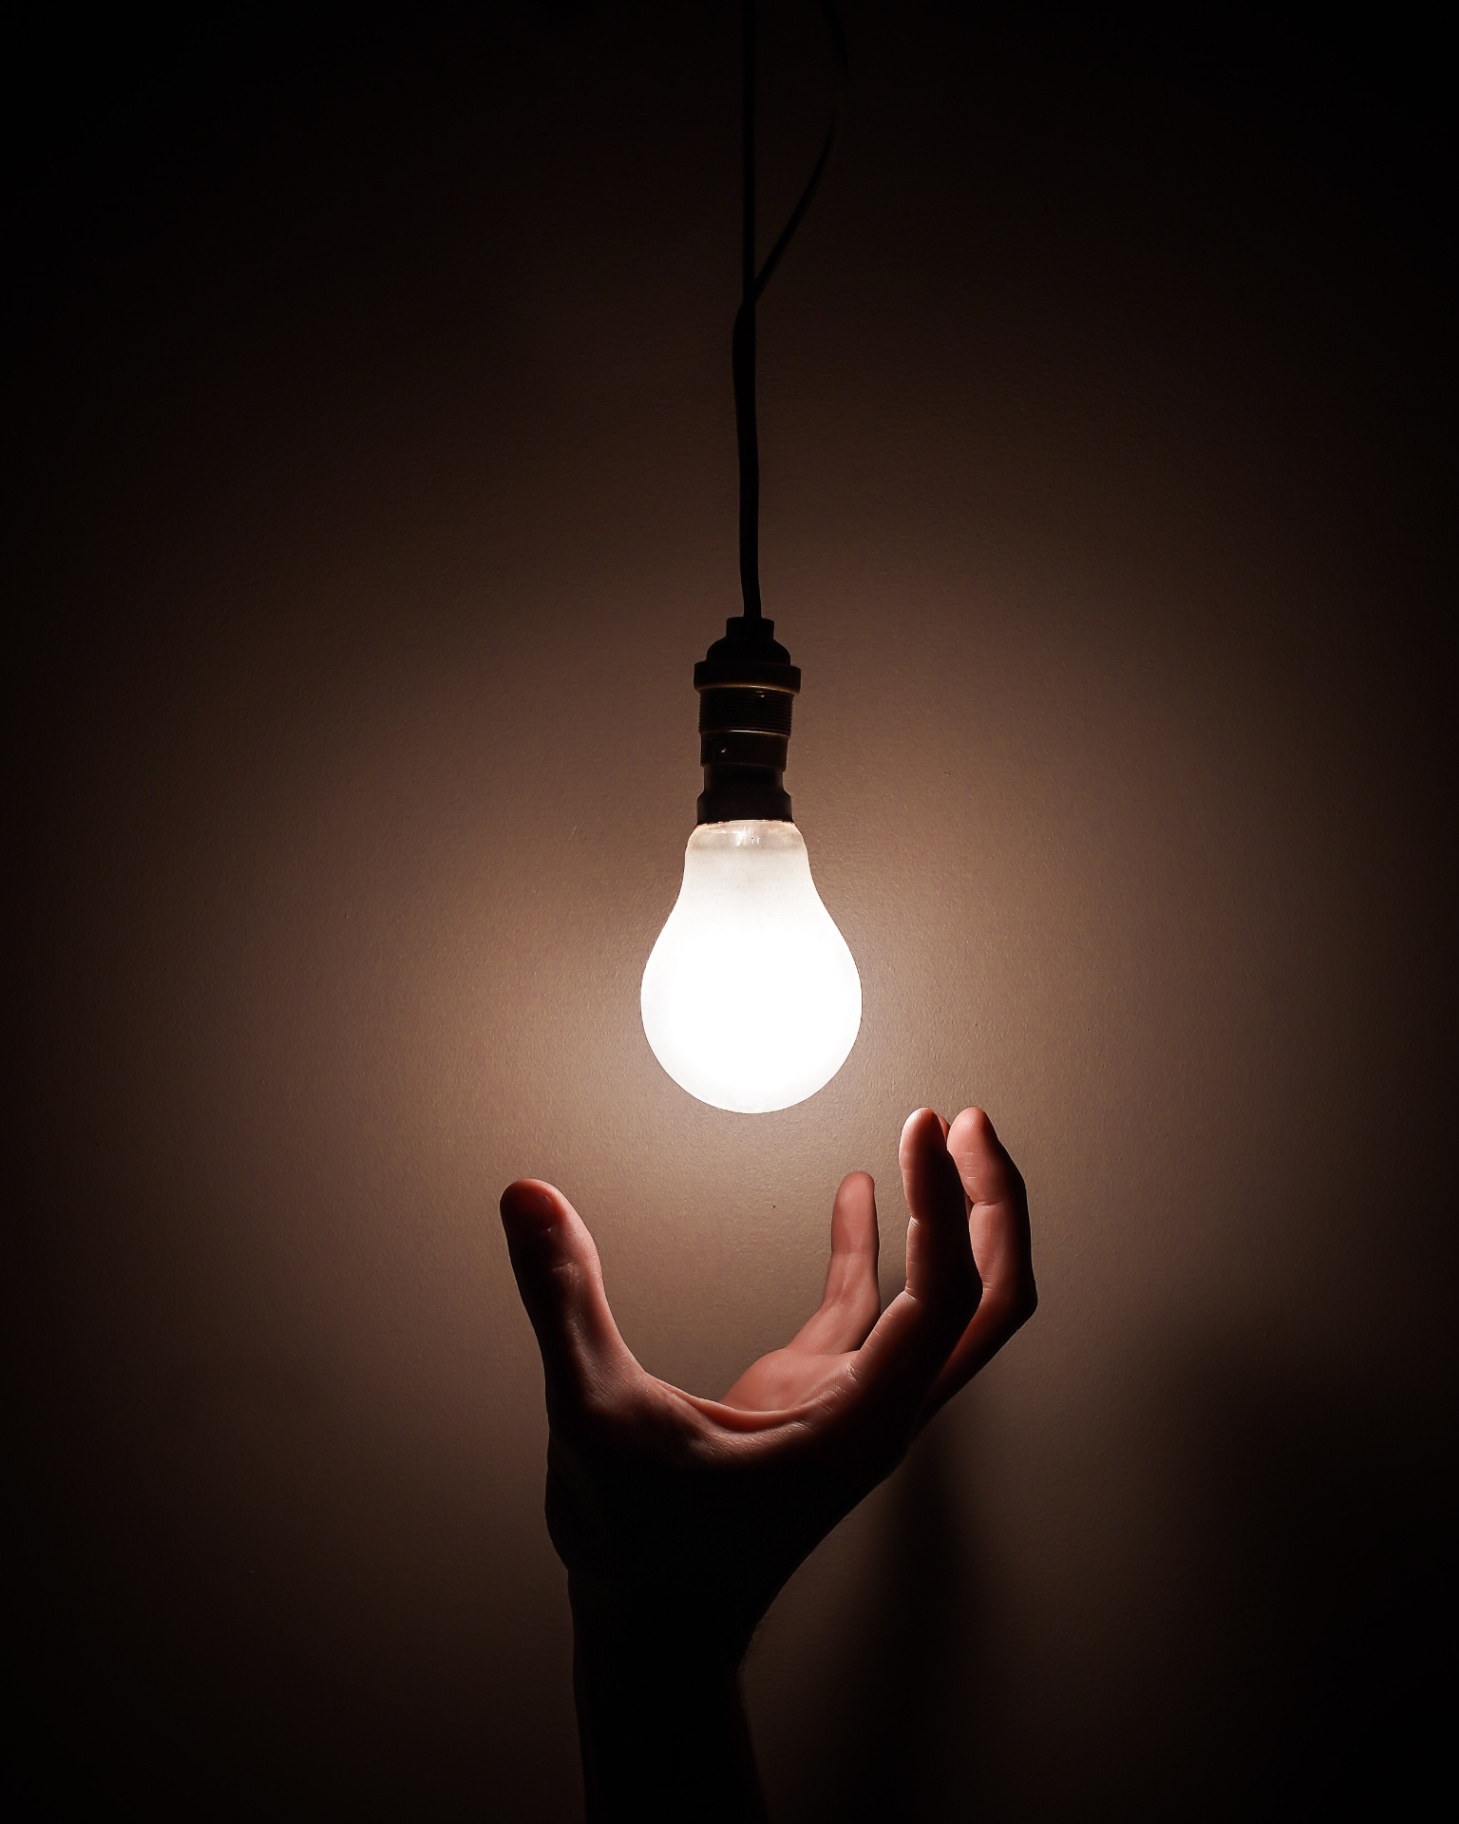 Light bulb with hand reaching to change it